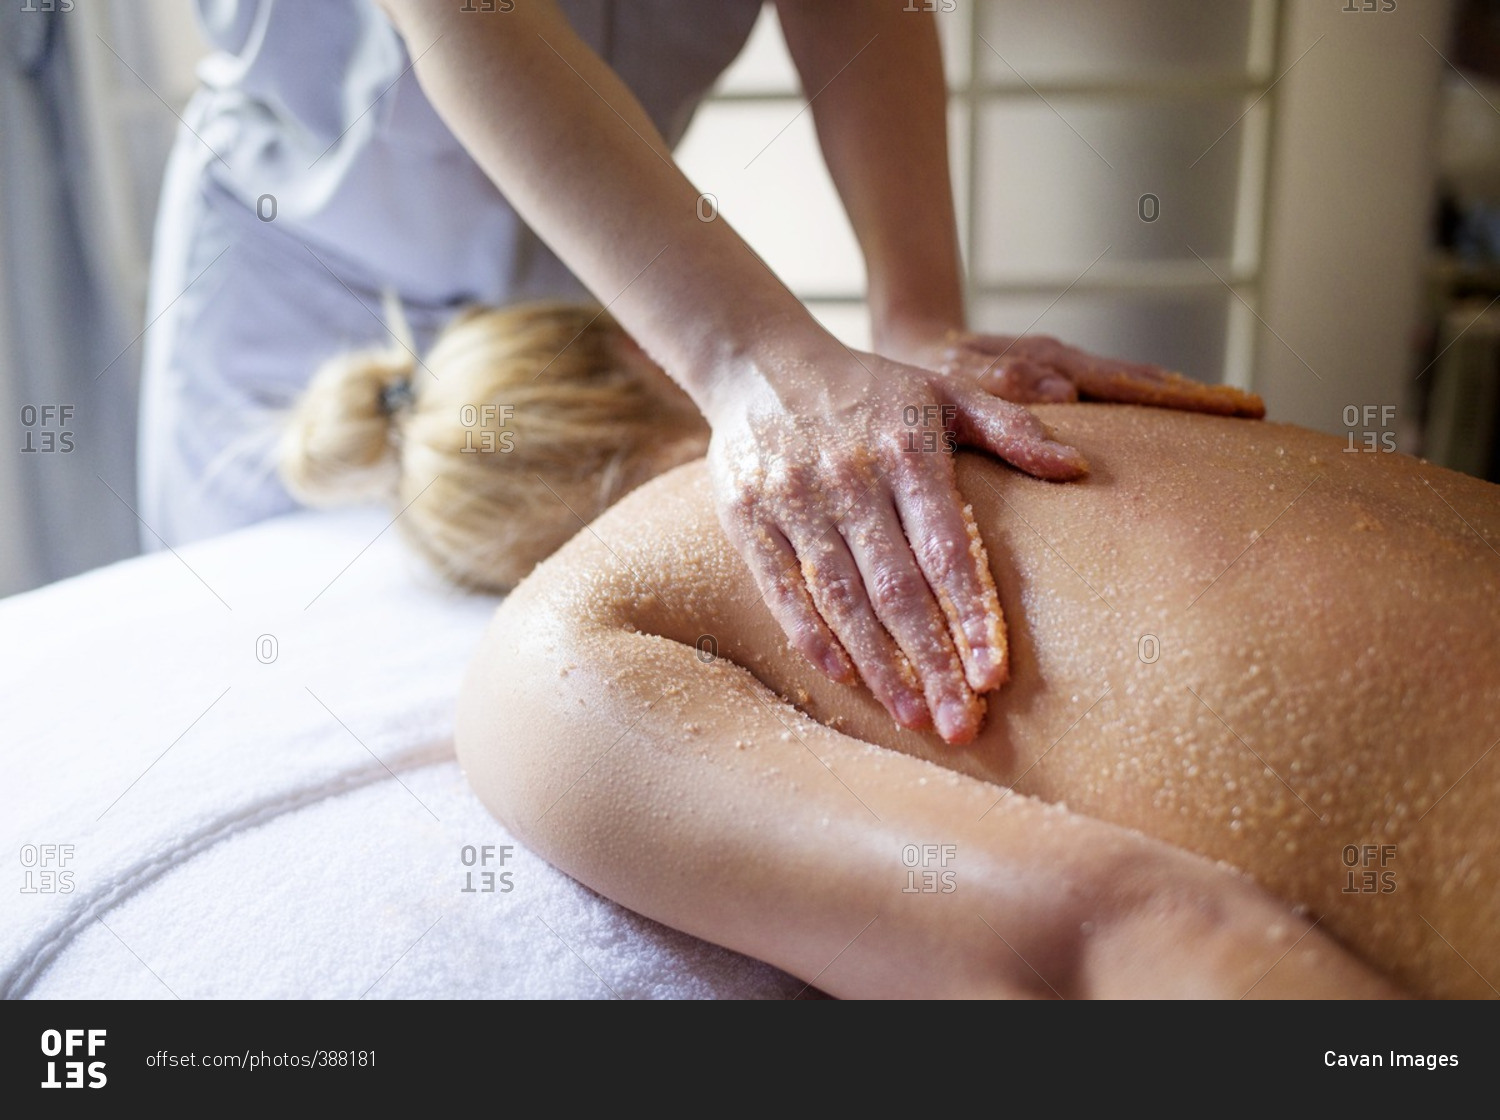 Midsection of therapist massaging woman's back in spa